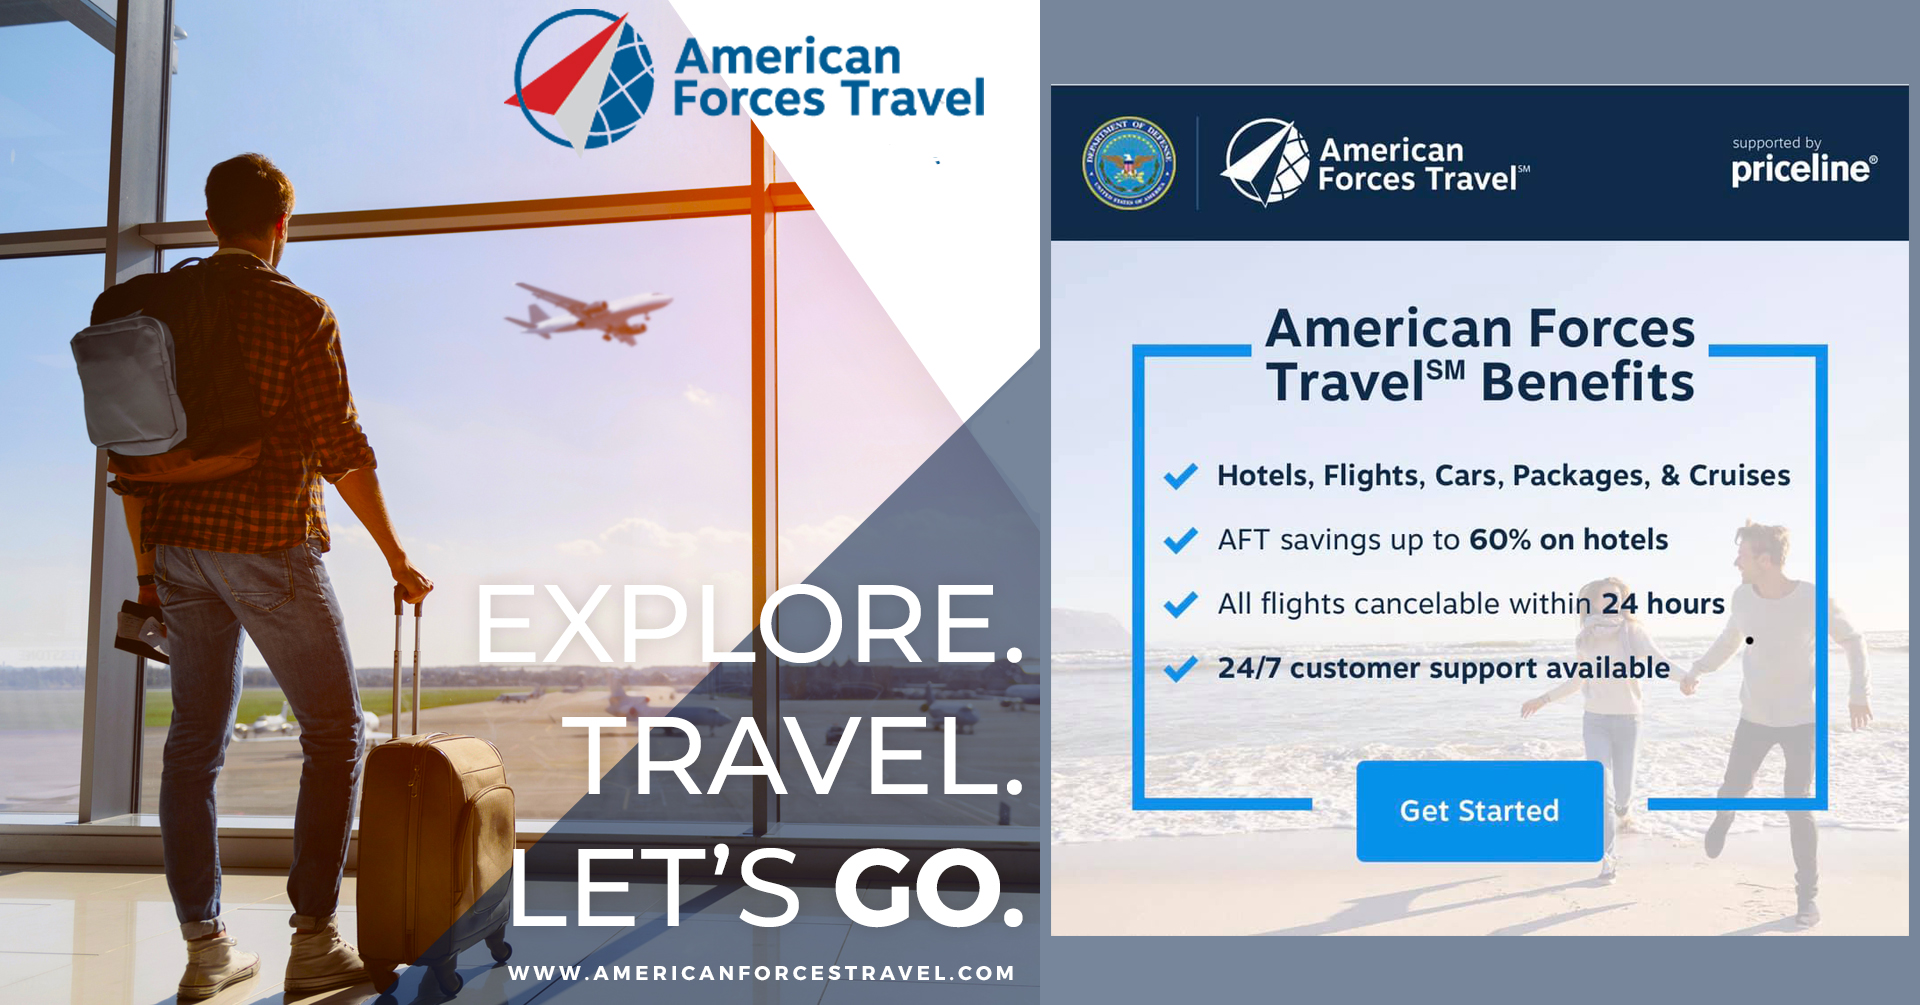 American Forces Travel Information